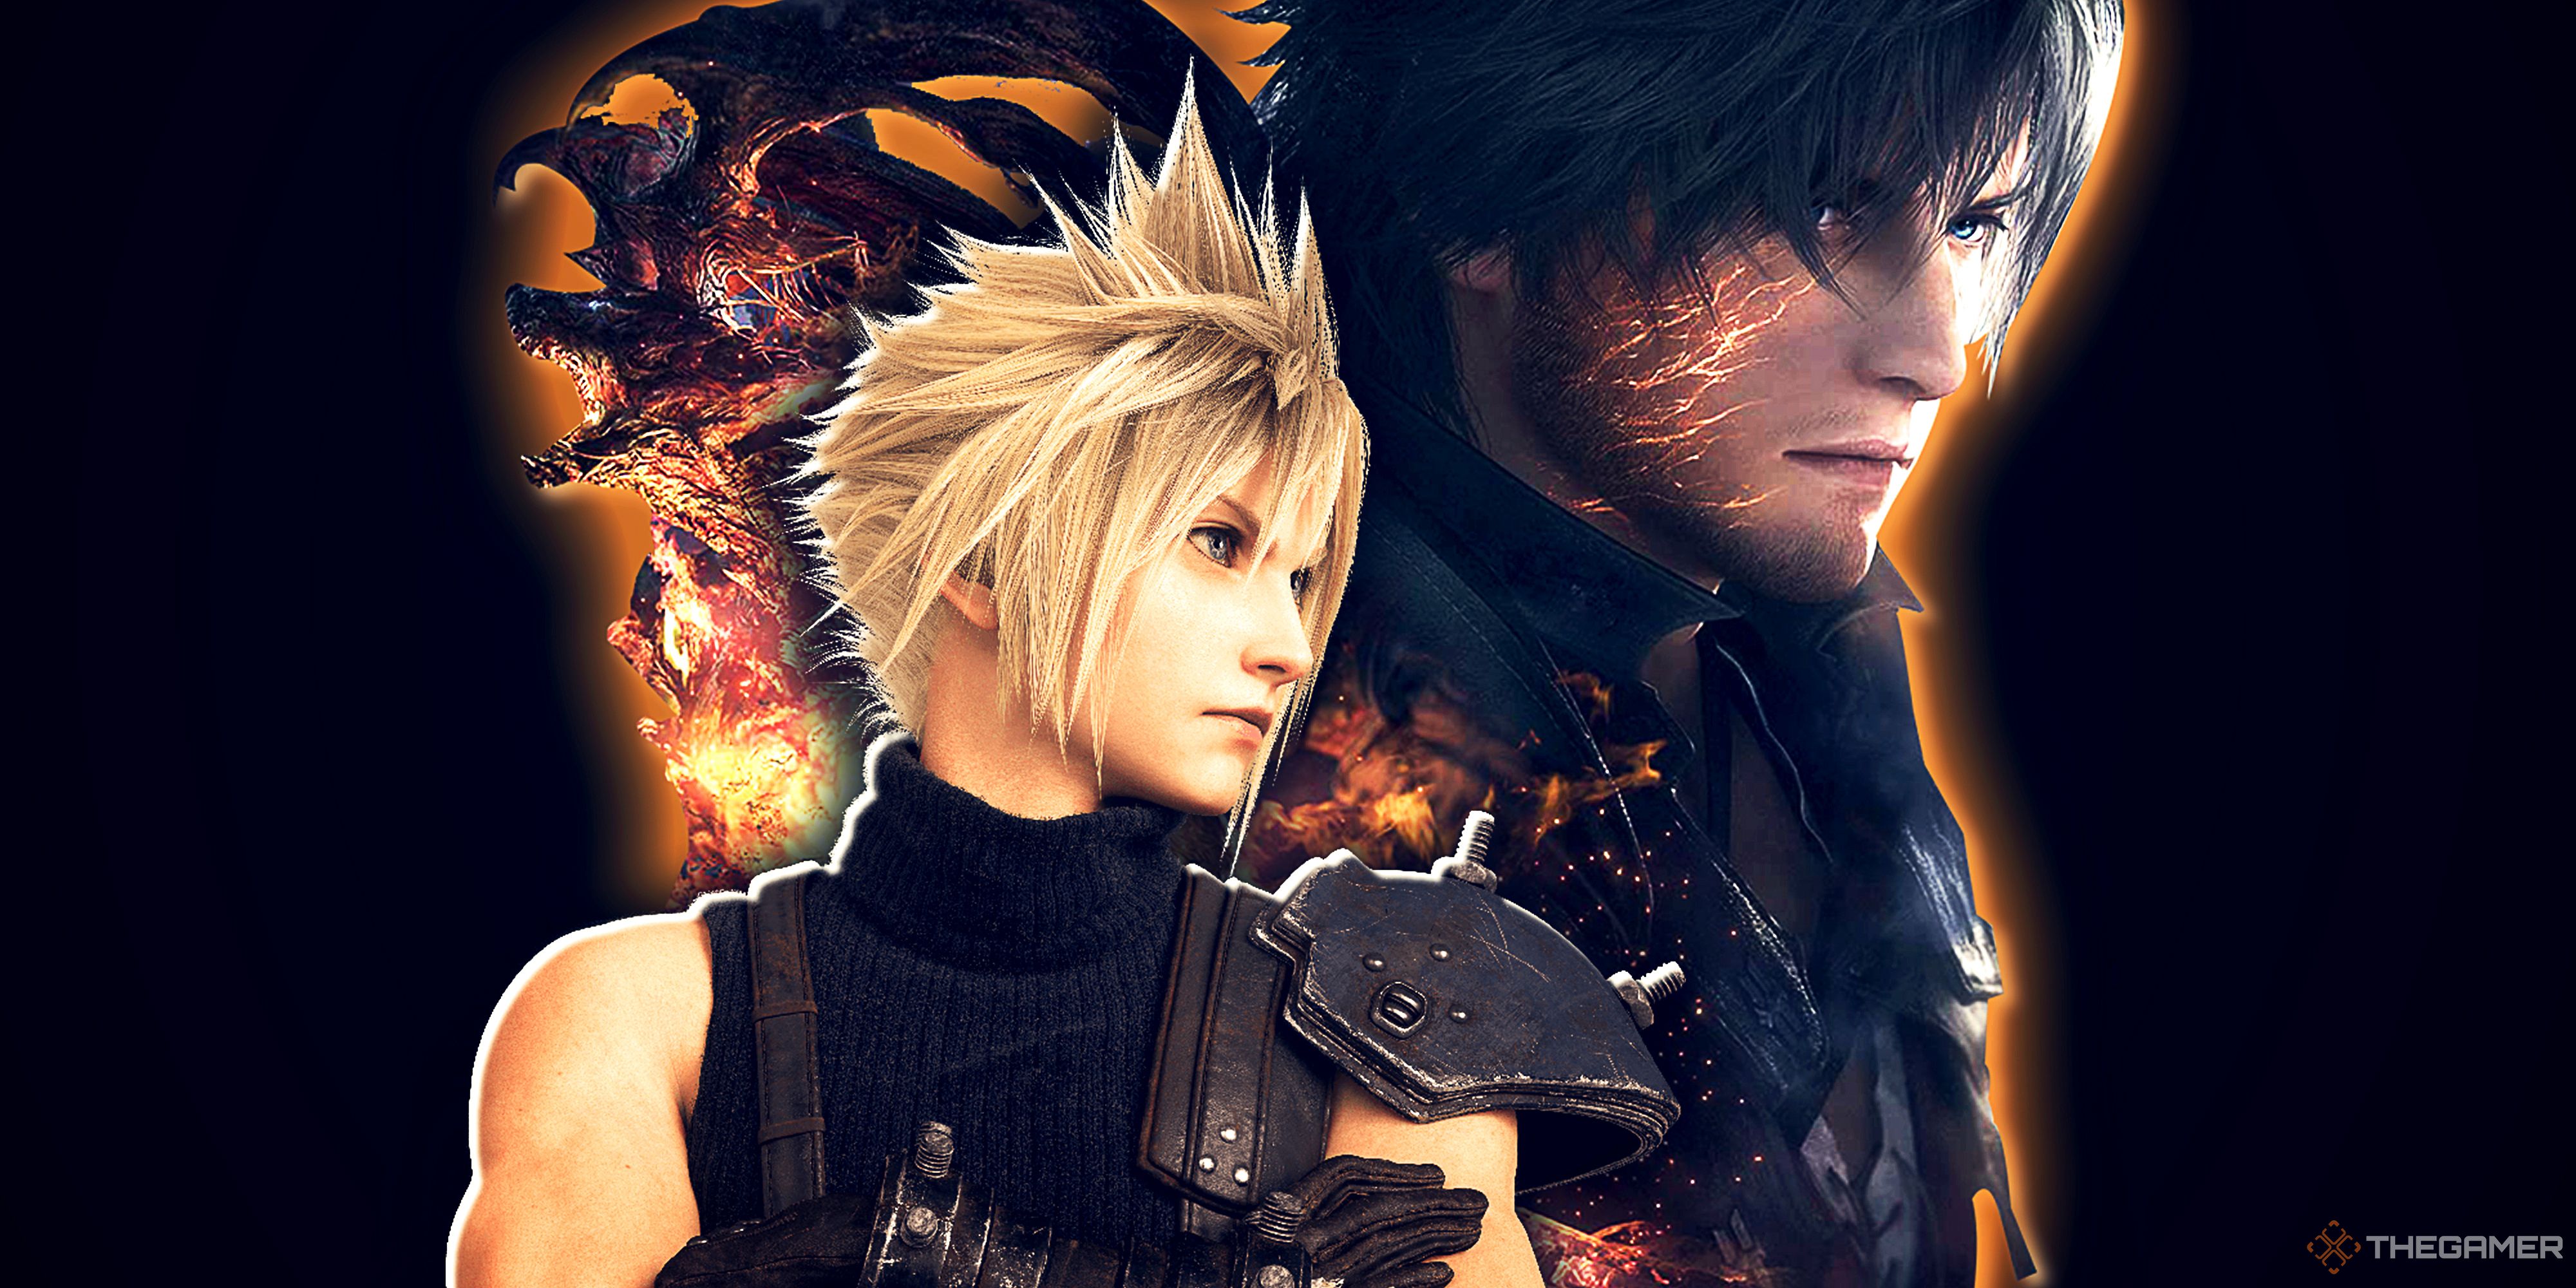 Final Fantasy's Failure Is A Death Knell For Console Exclusives